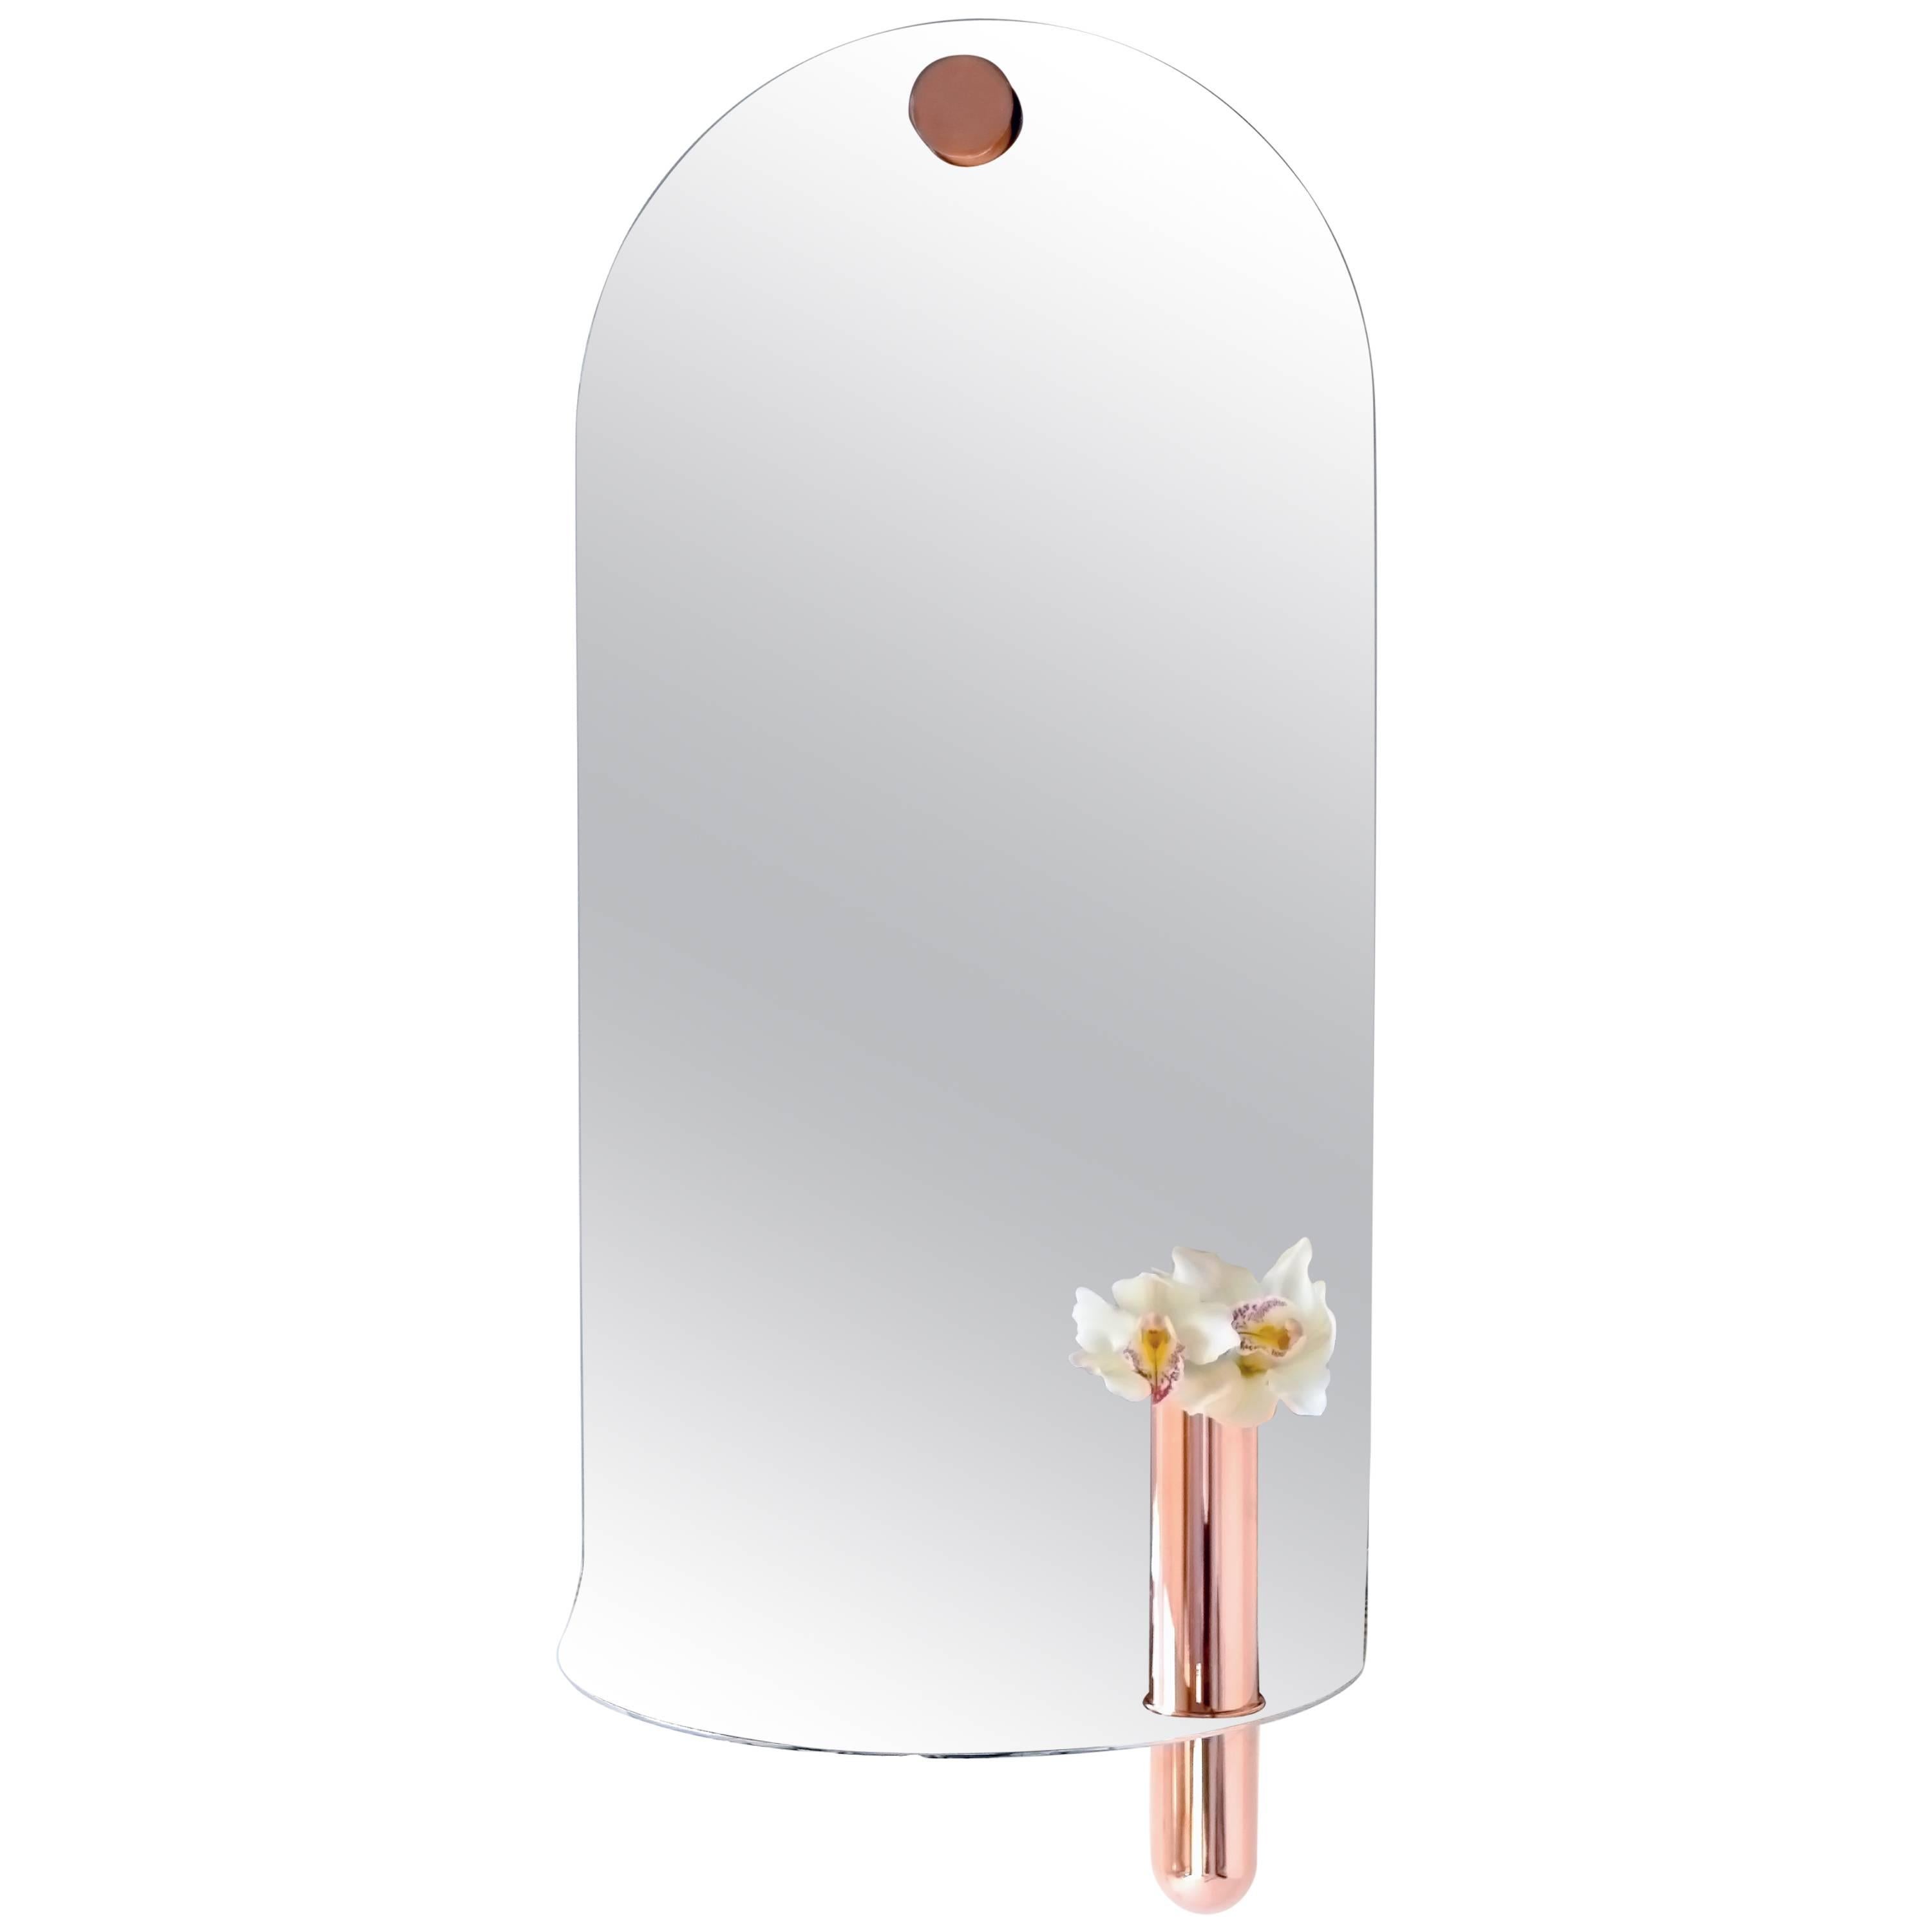 Polished Stainless Steel Mirror with Brushed Brass Vase by Birnam Wood Studio For Sale 3